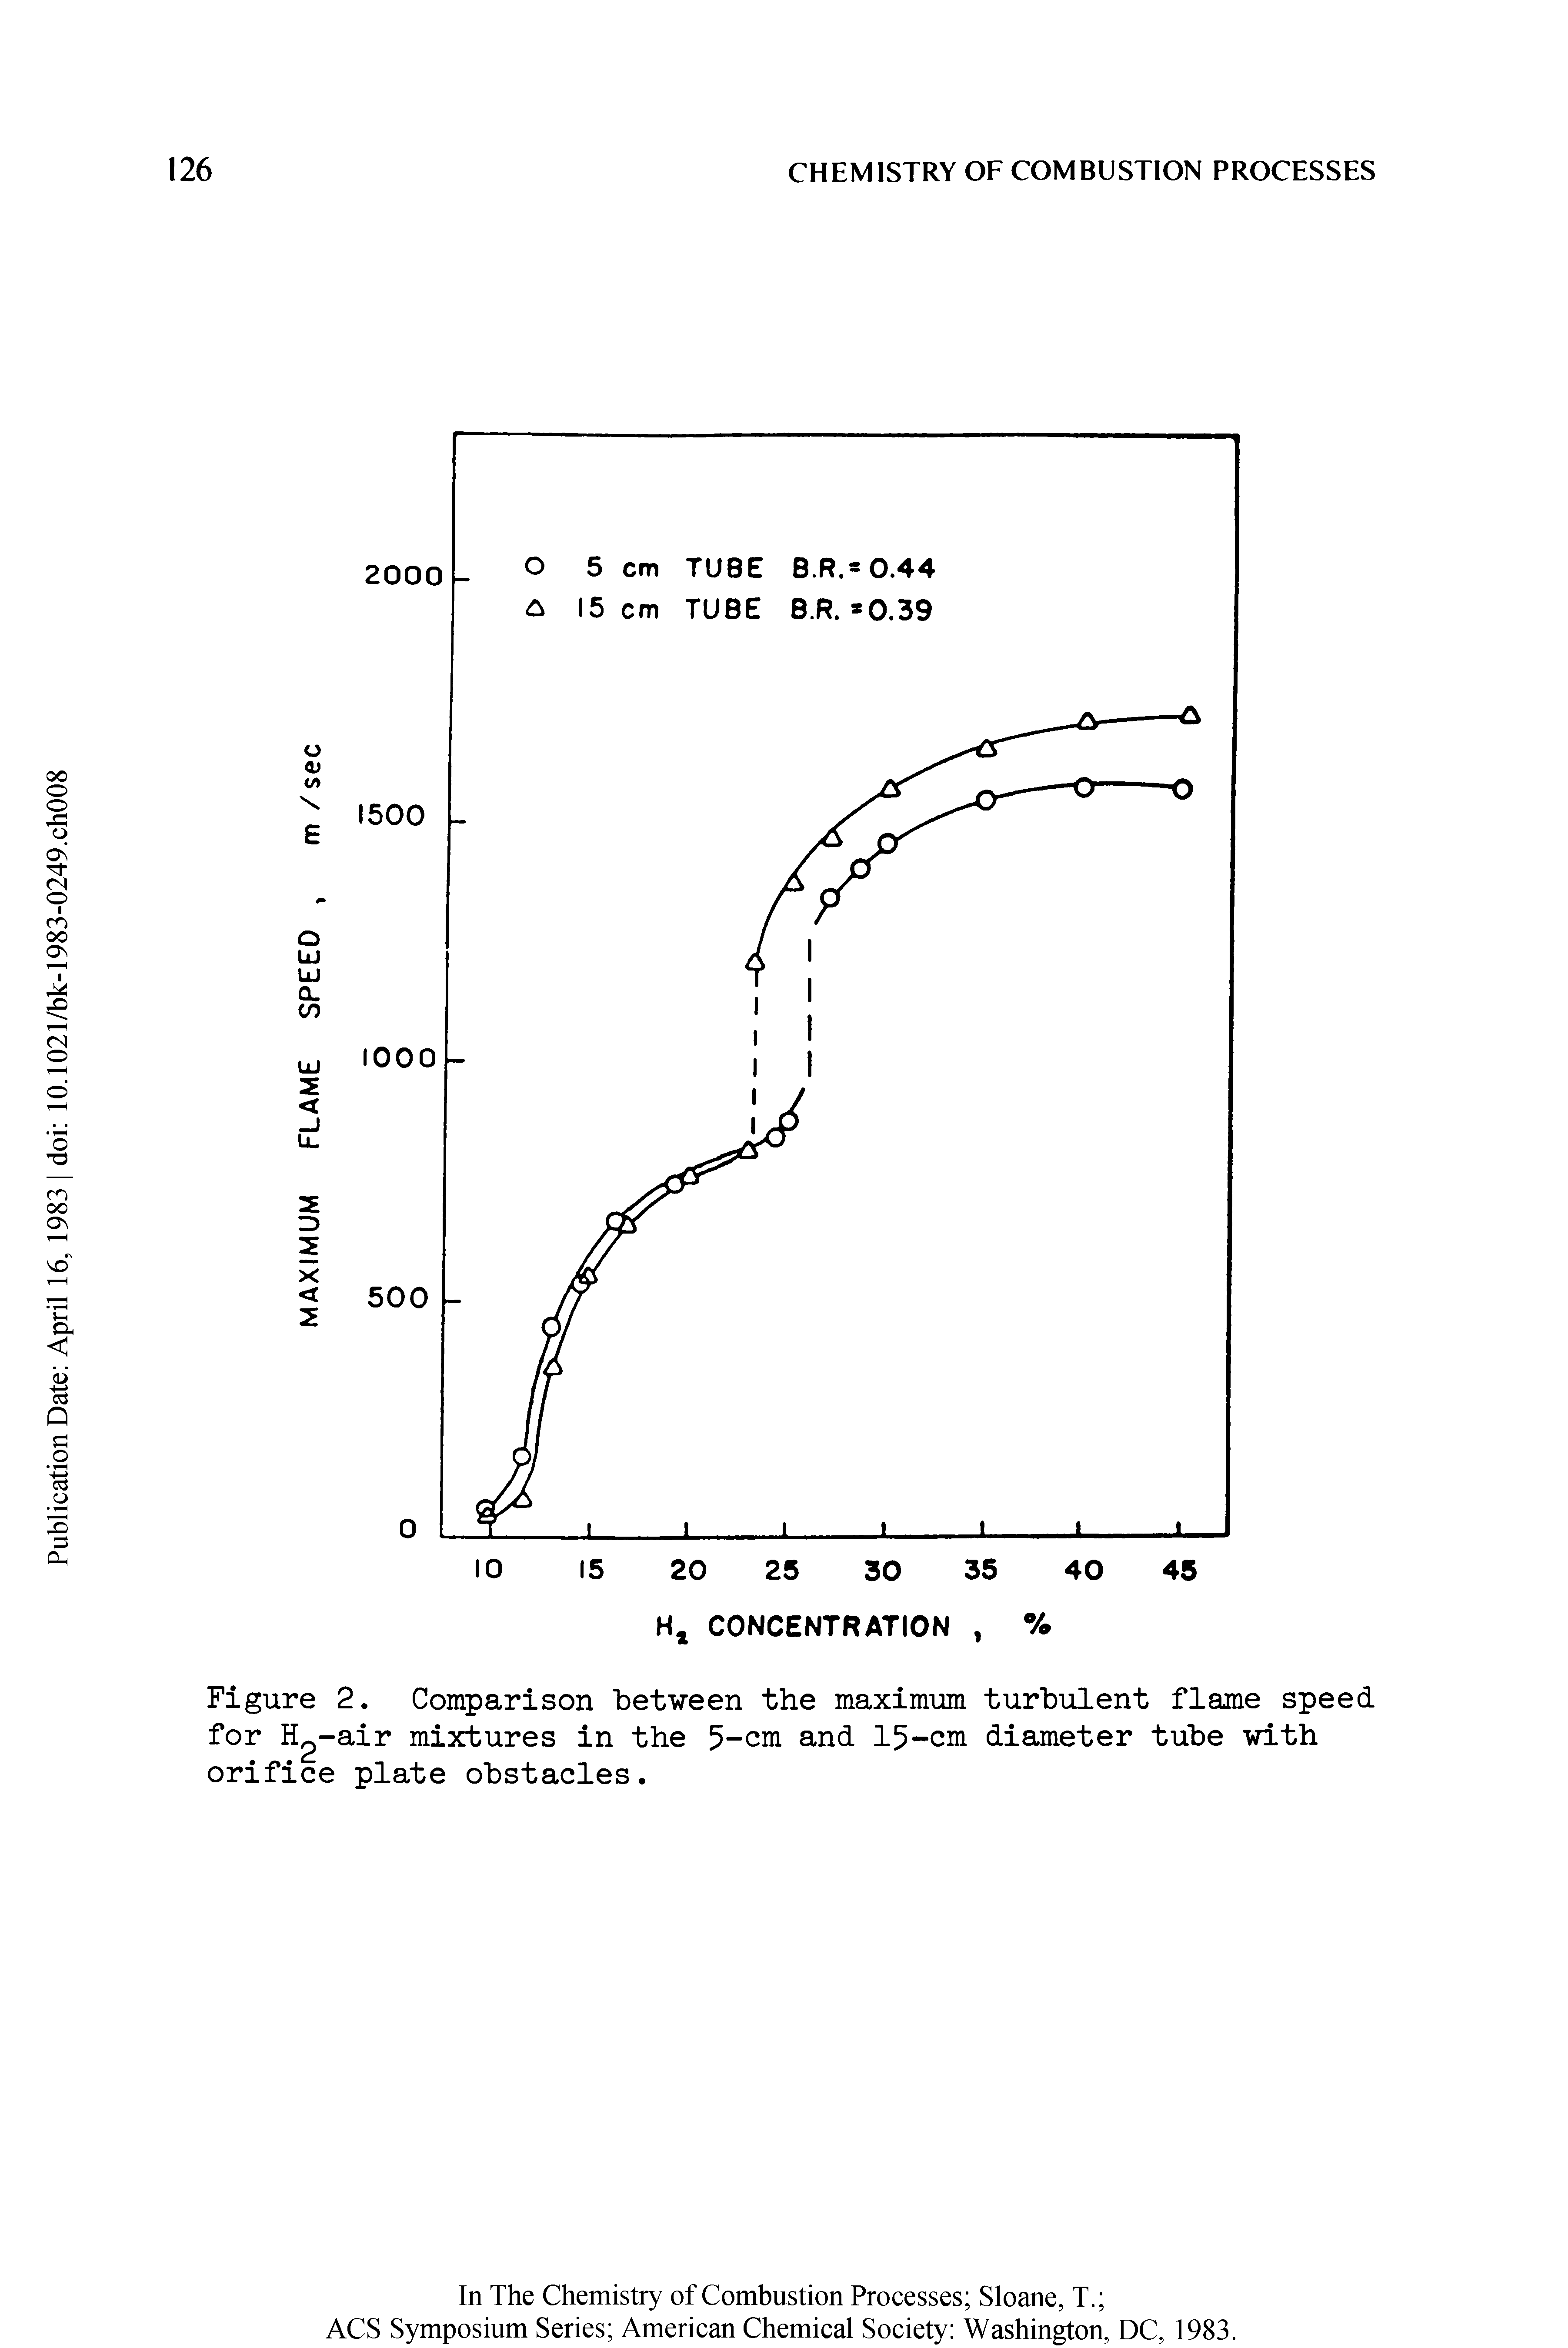 Figure 2. Comparison between the maximiam turbulent flame speed for H -air mixtures in the 5-cm and 15-cm diameter tube with orifice plate obstacles.